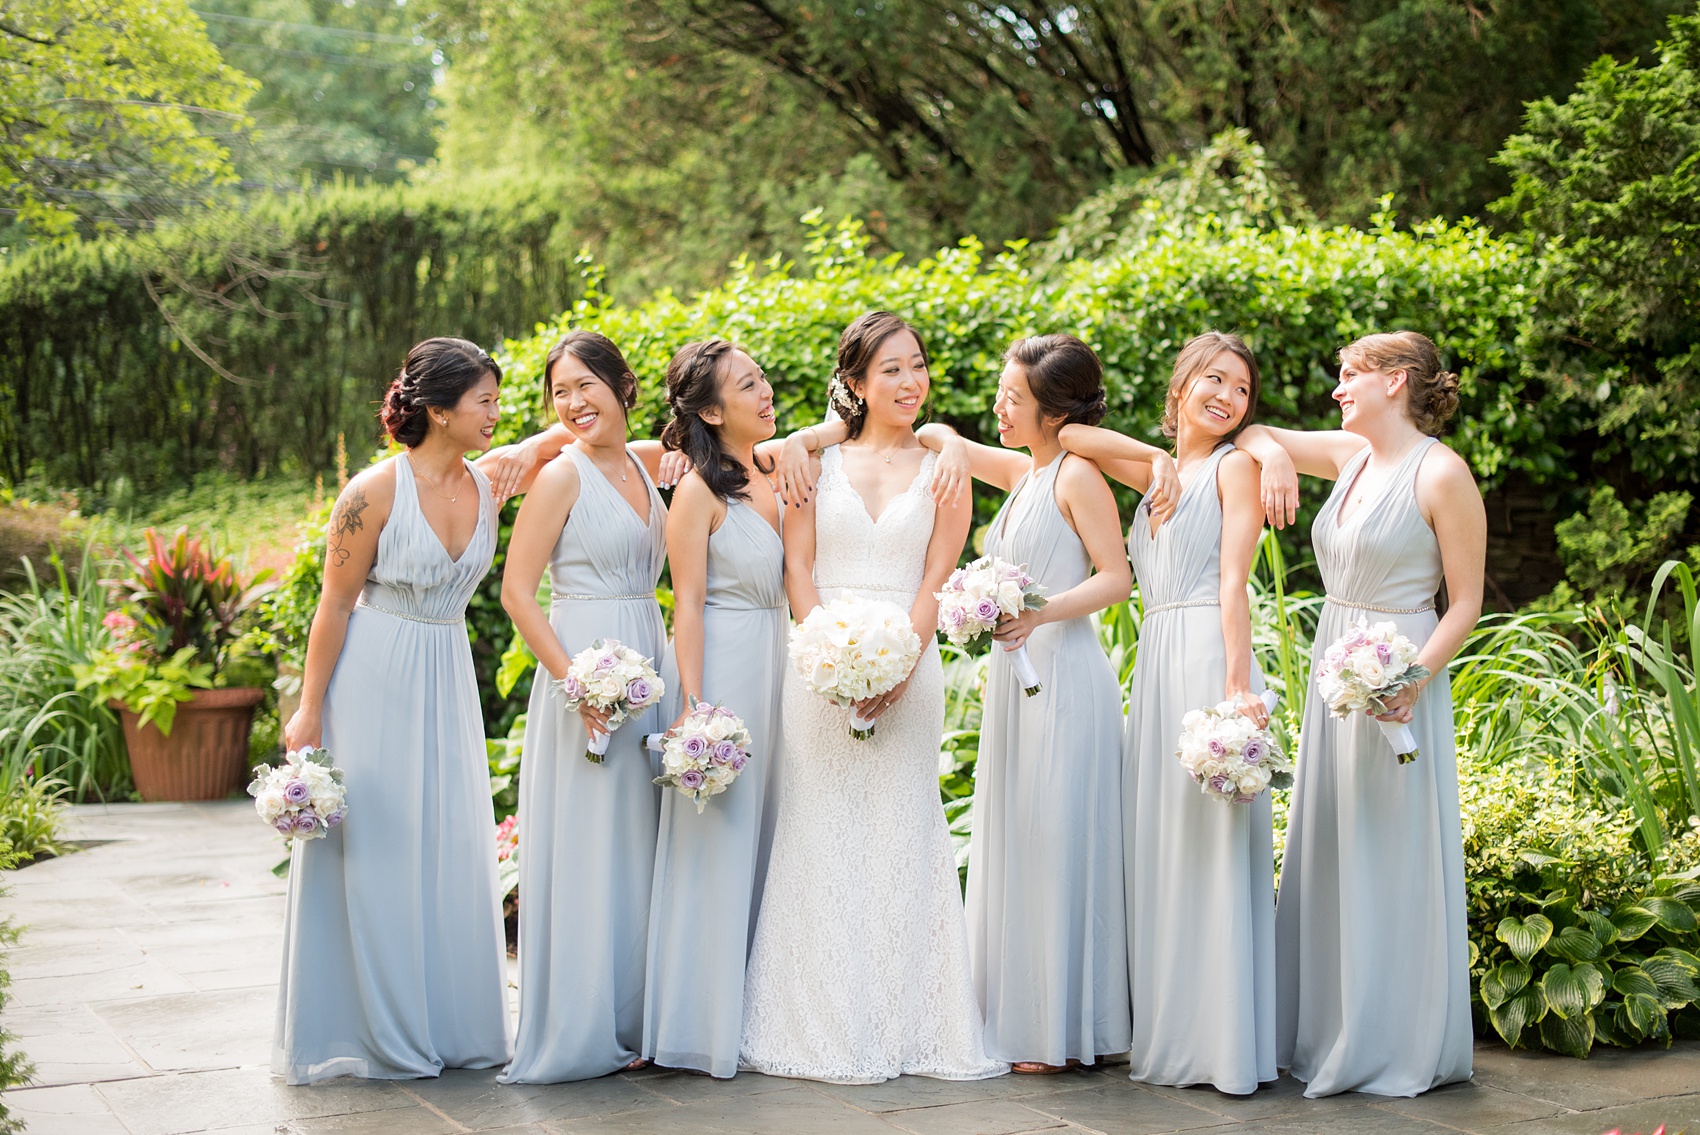 Mikkel Paige Photography pictures of a Westbury Manor wedding on Long Island. Casual photo of the bridesmaids in blue-grey gowns.